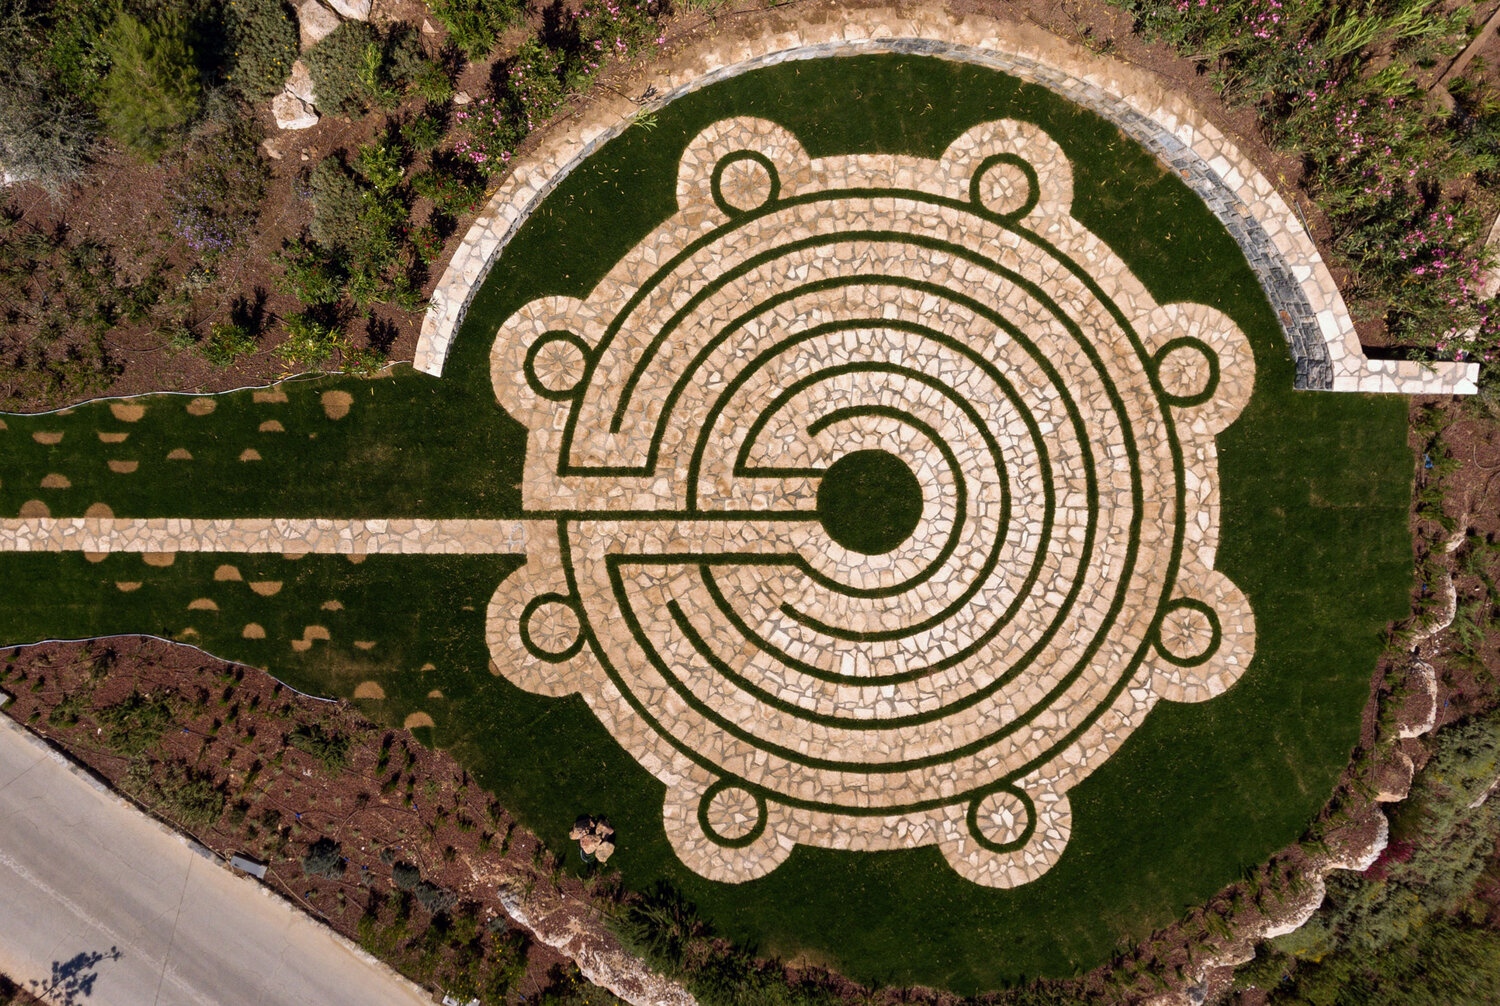 The labyrinth garden as seen from the air.